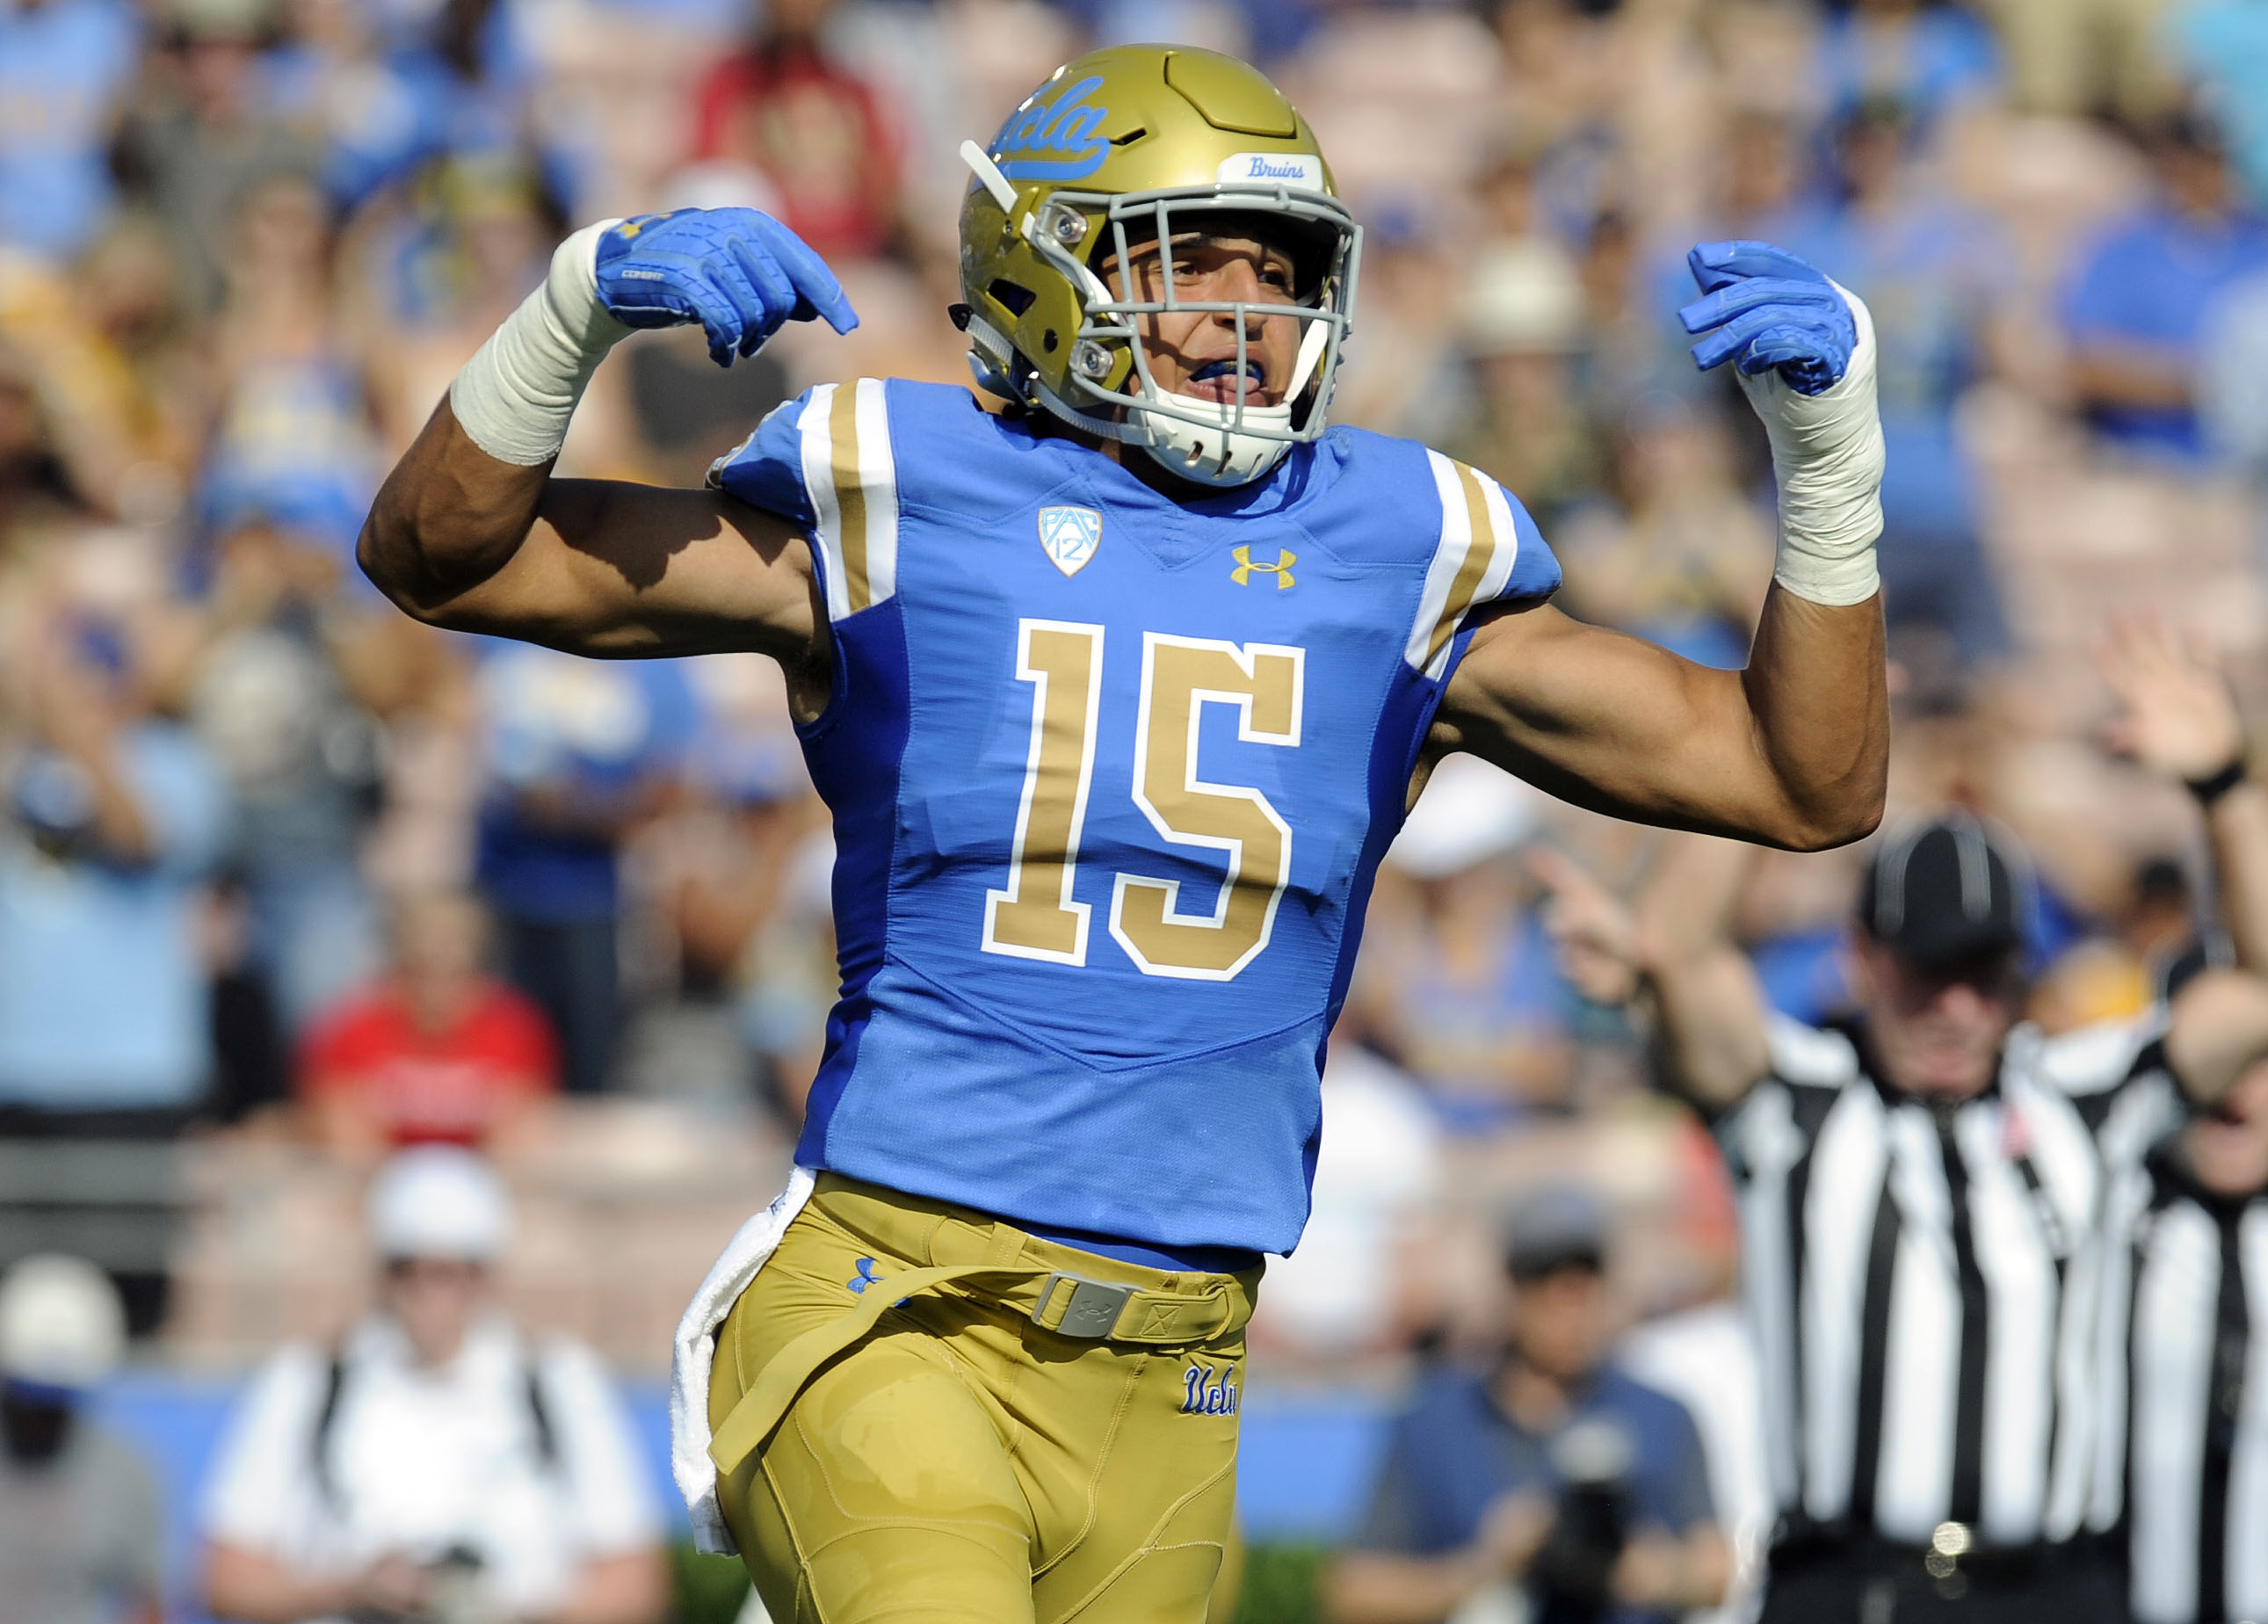 UCLA Bruins linebacker Jaelan Phillips (15) reacts after a defensive play against the Cincinnati Bearcats during the first half at the Rose Bowl.